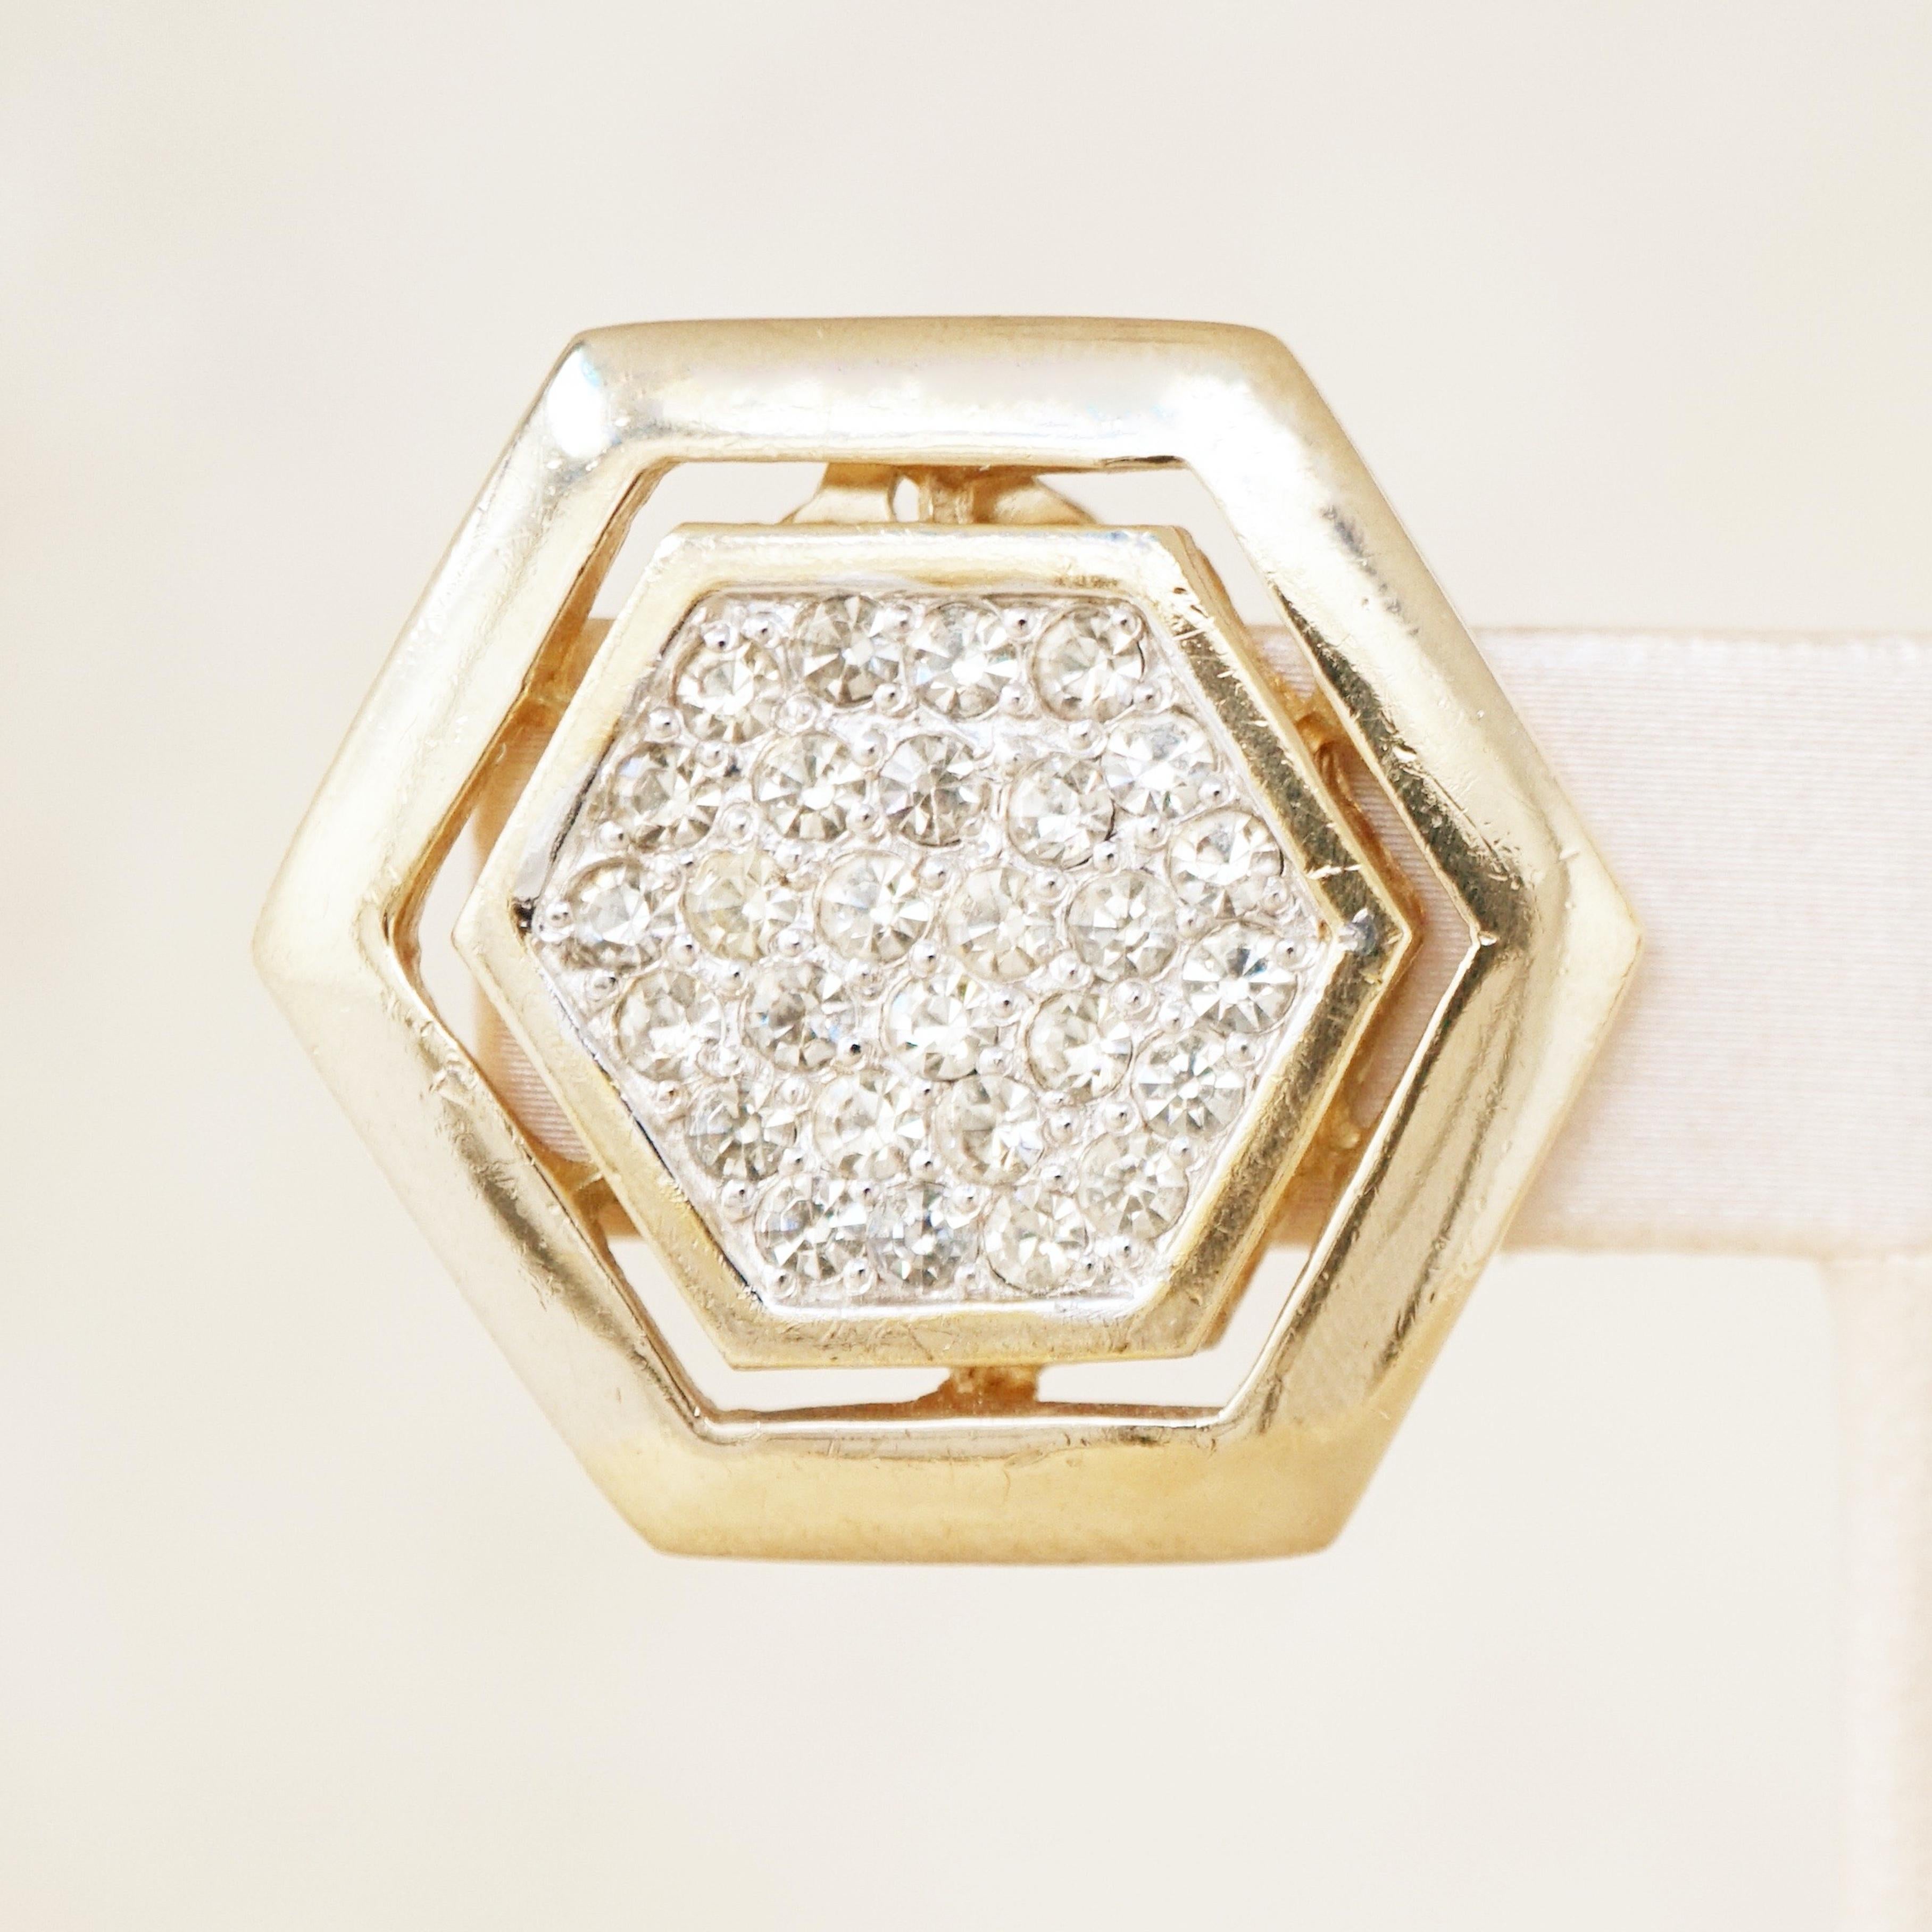 Modern Vintage Gilded Hexagon Statement Earrings with Crystal Pavé by Panetta, 1980s For Sale